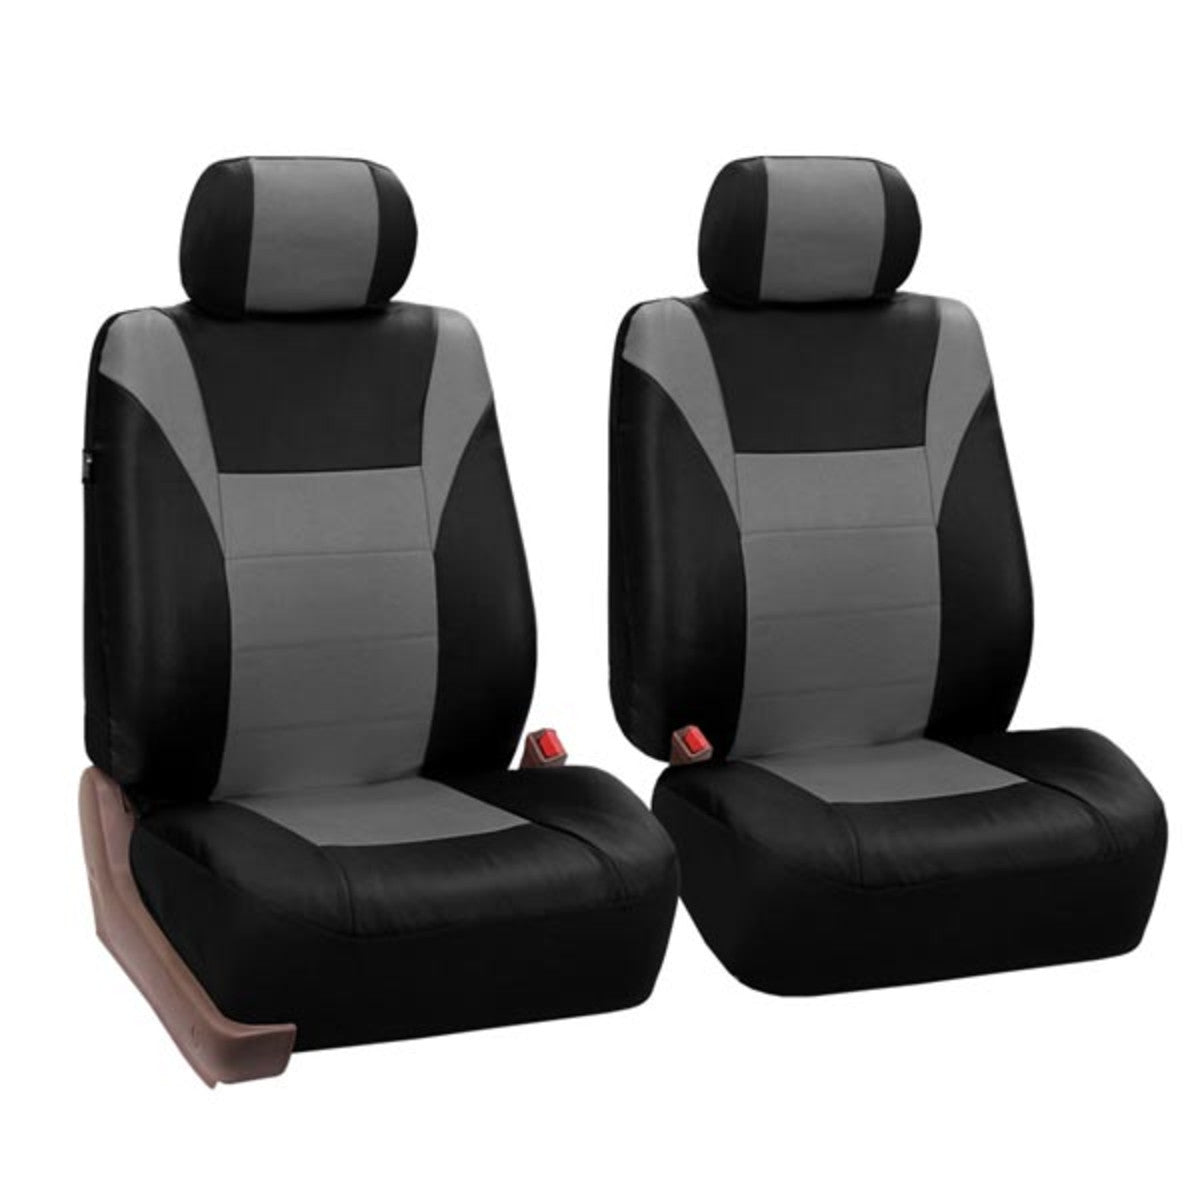 Racing PU Leather Seat Covers - Full Set Gray